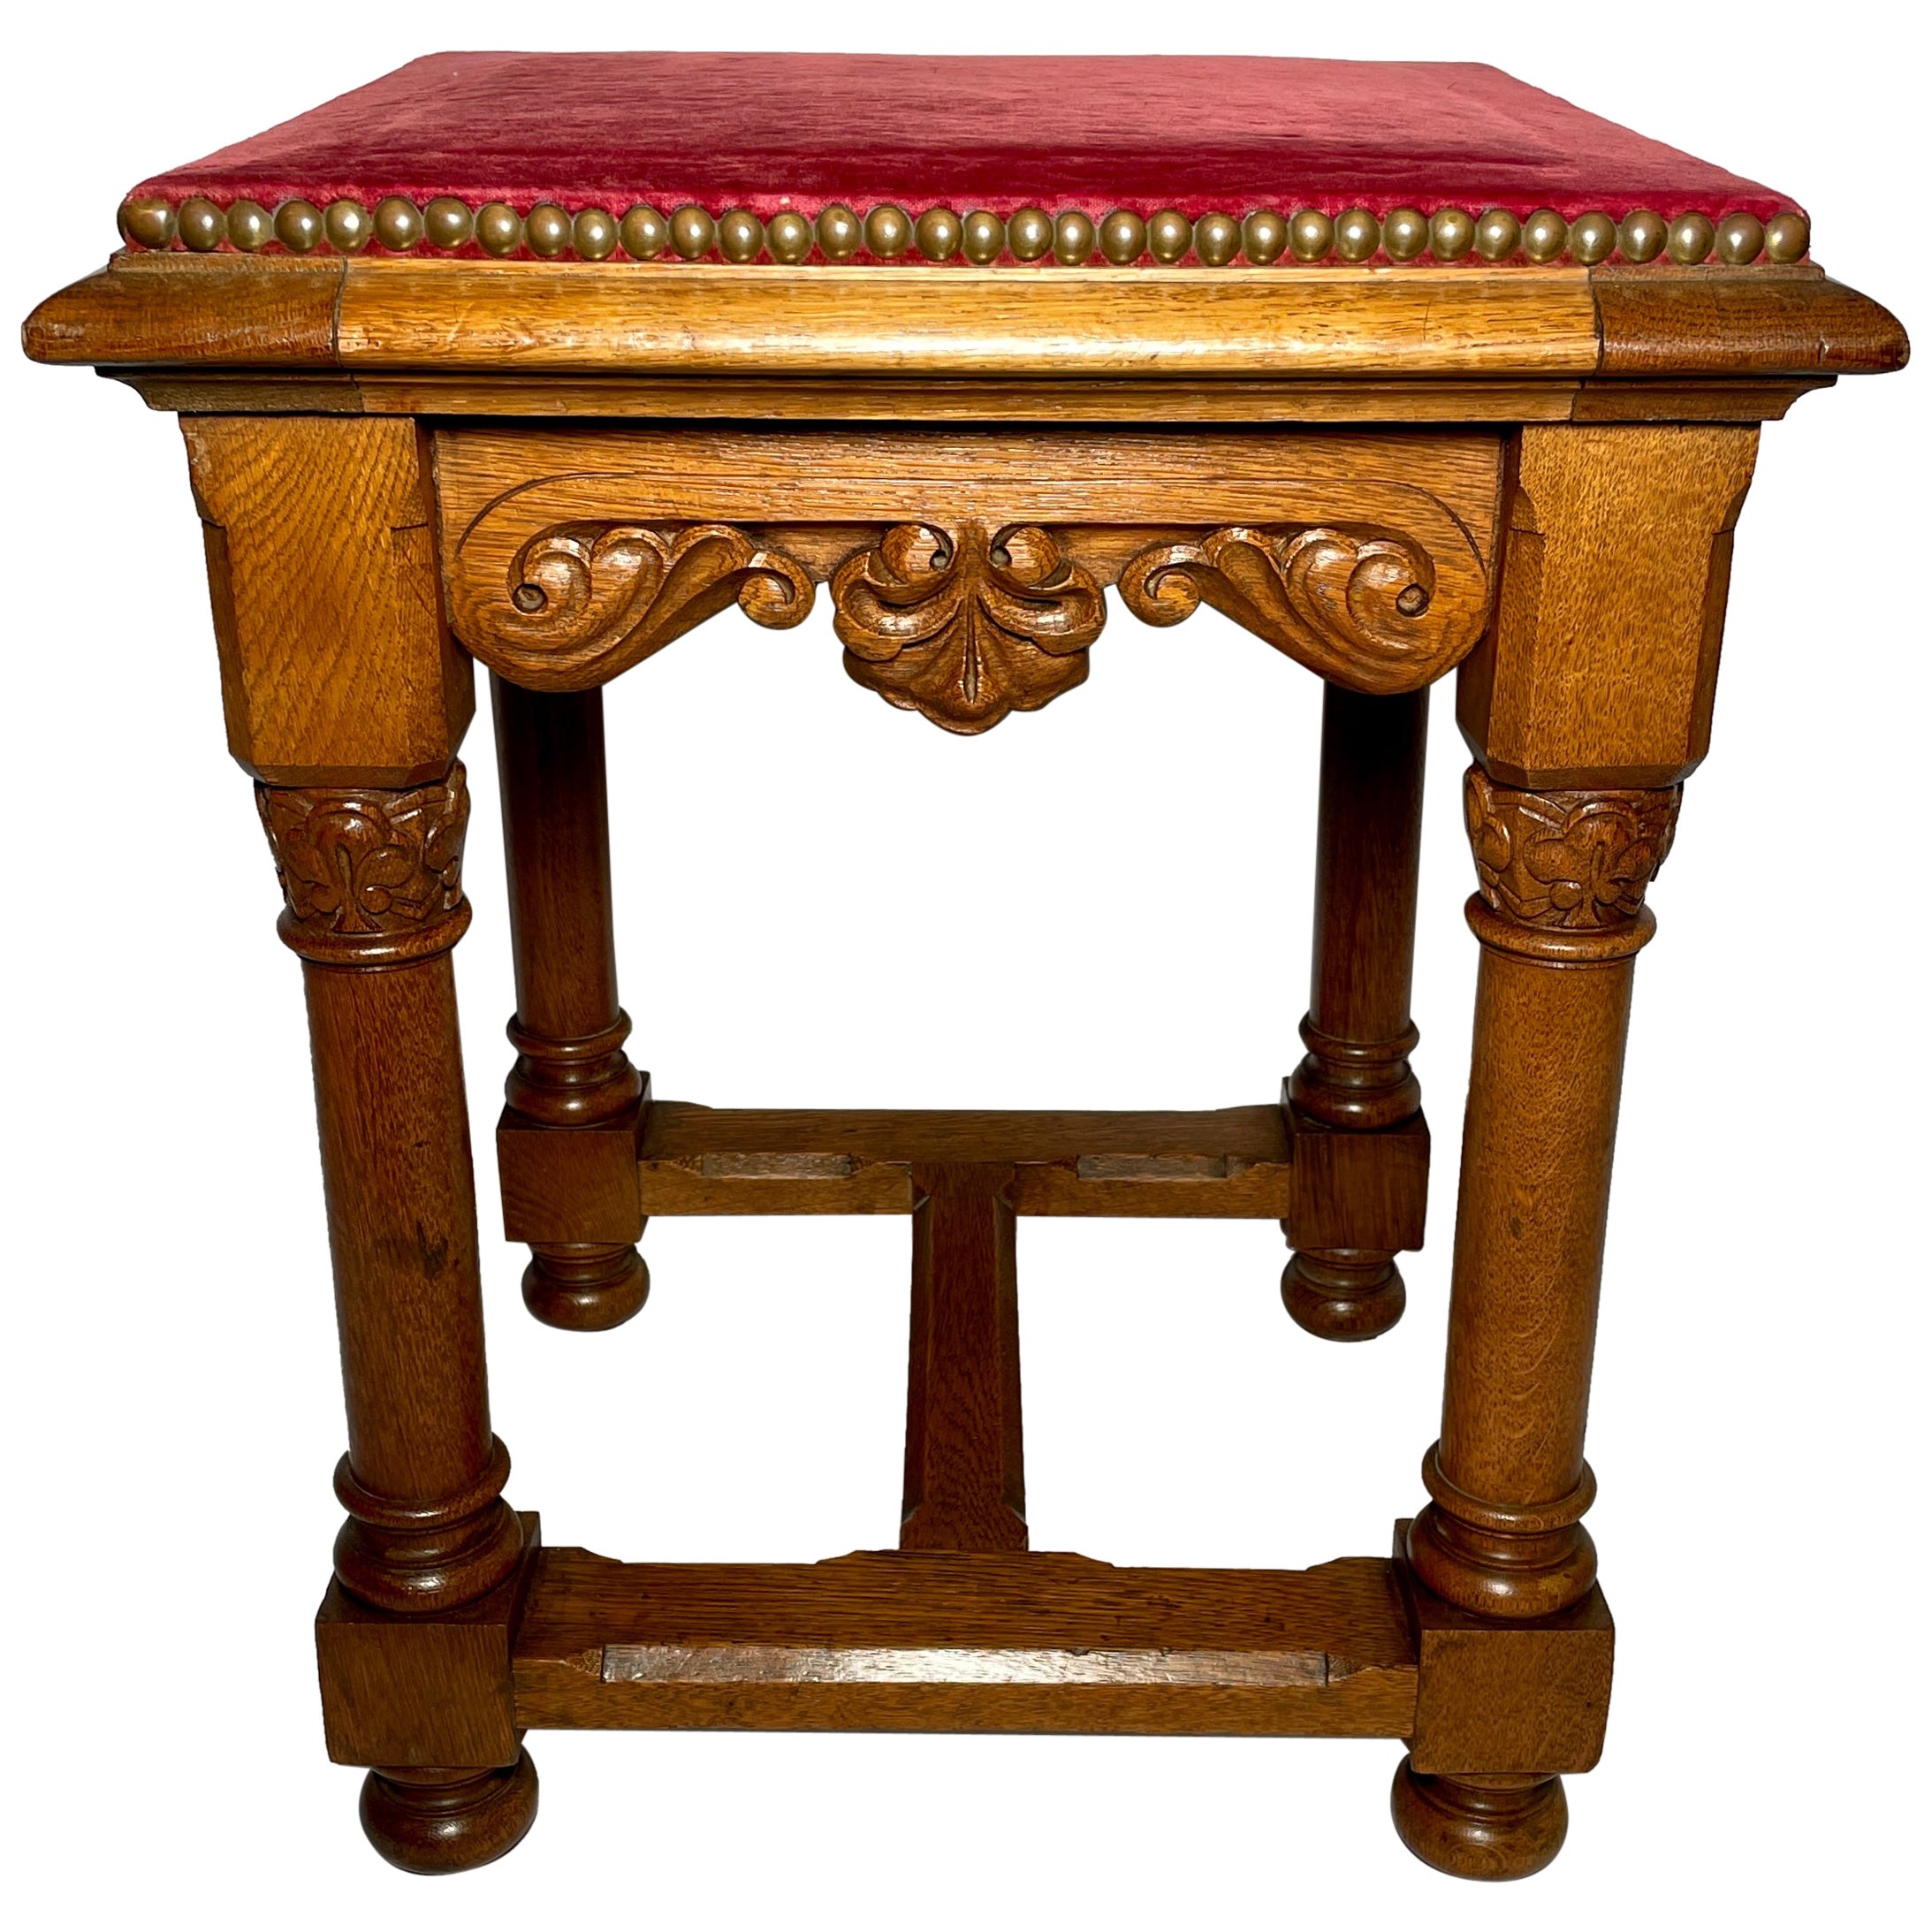 Antique French Carved Oak Stool, circa 1900